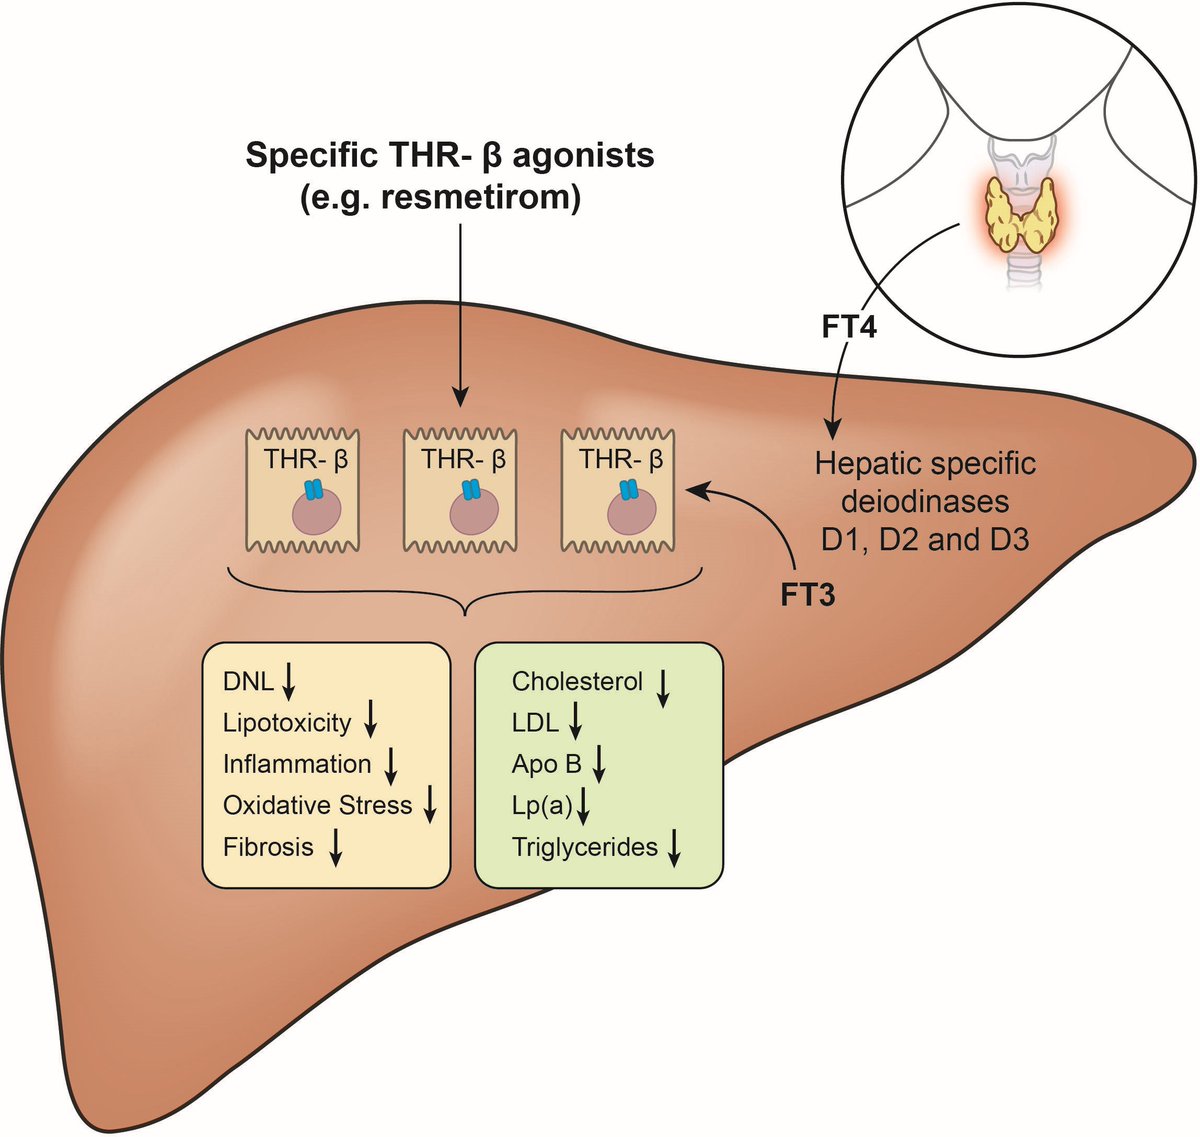 #GUTImage from the #LeadingArticle paper by Byrne et al entitled

'Thyroid hormone receptor-beta agonists: new MASLD therapies on the horizon' via

bit.ly/3vdfuJH

#MASLD